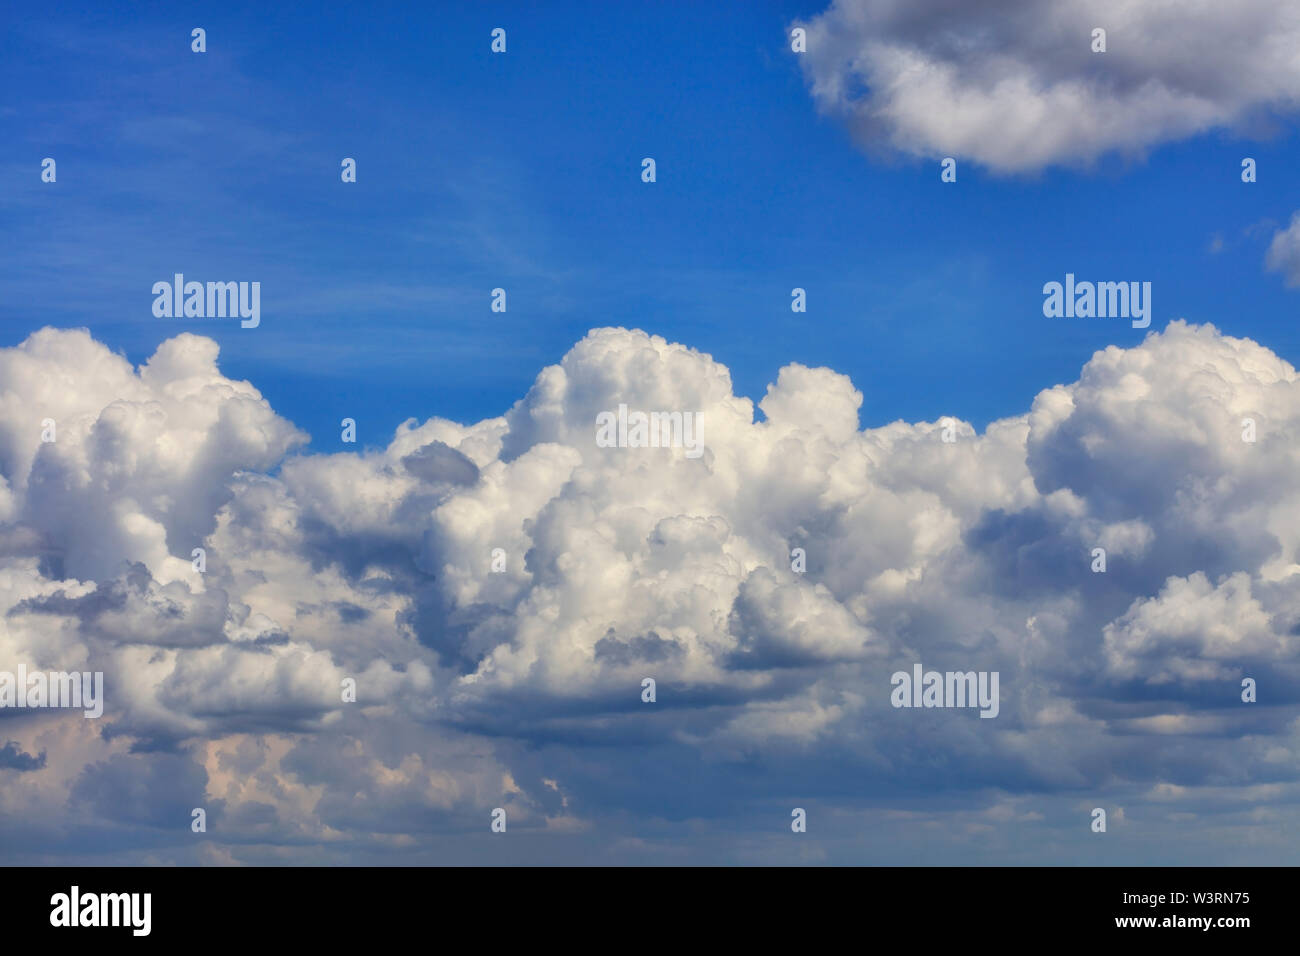 In the blue sky, a white-gray fluffy cloud gradually turns into a gray rainy cloud. Close-up. Stock Photo